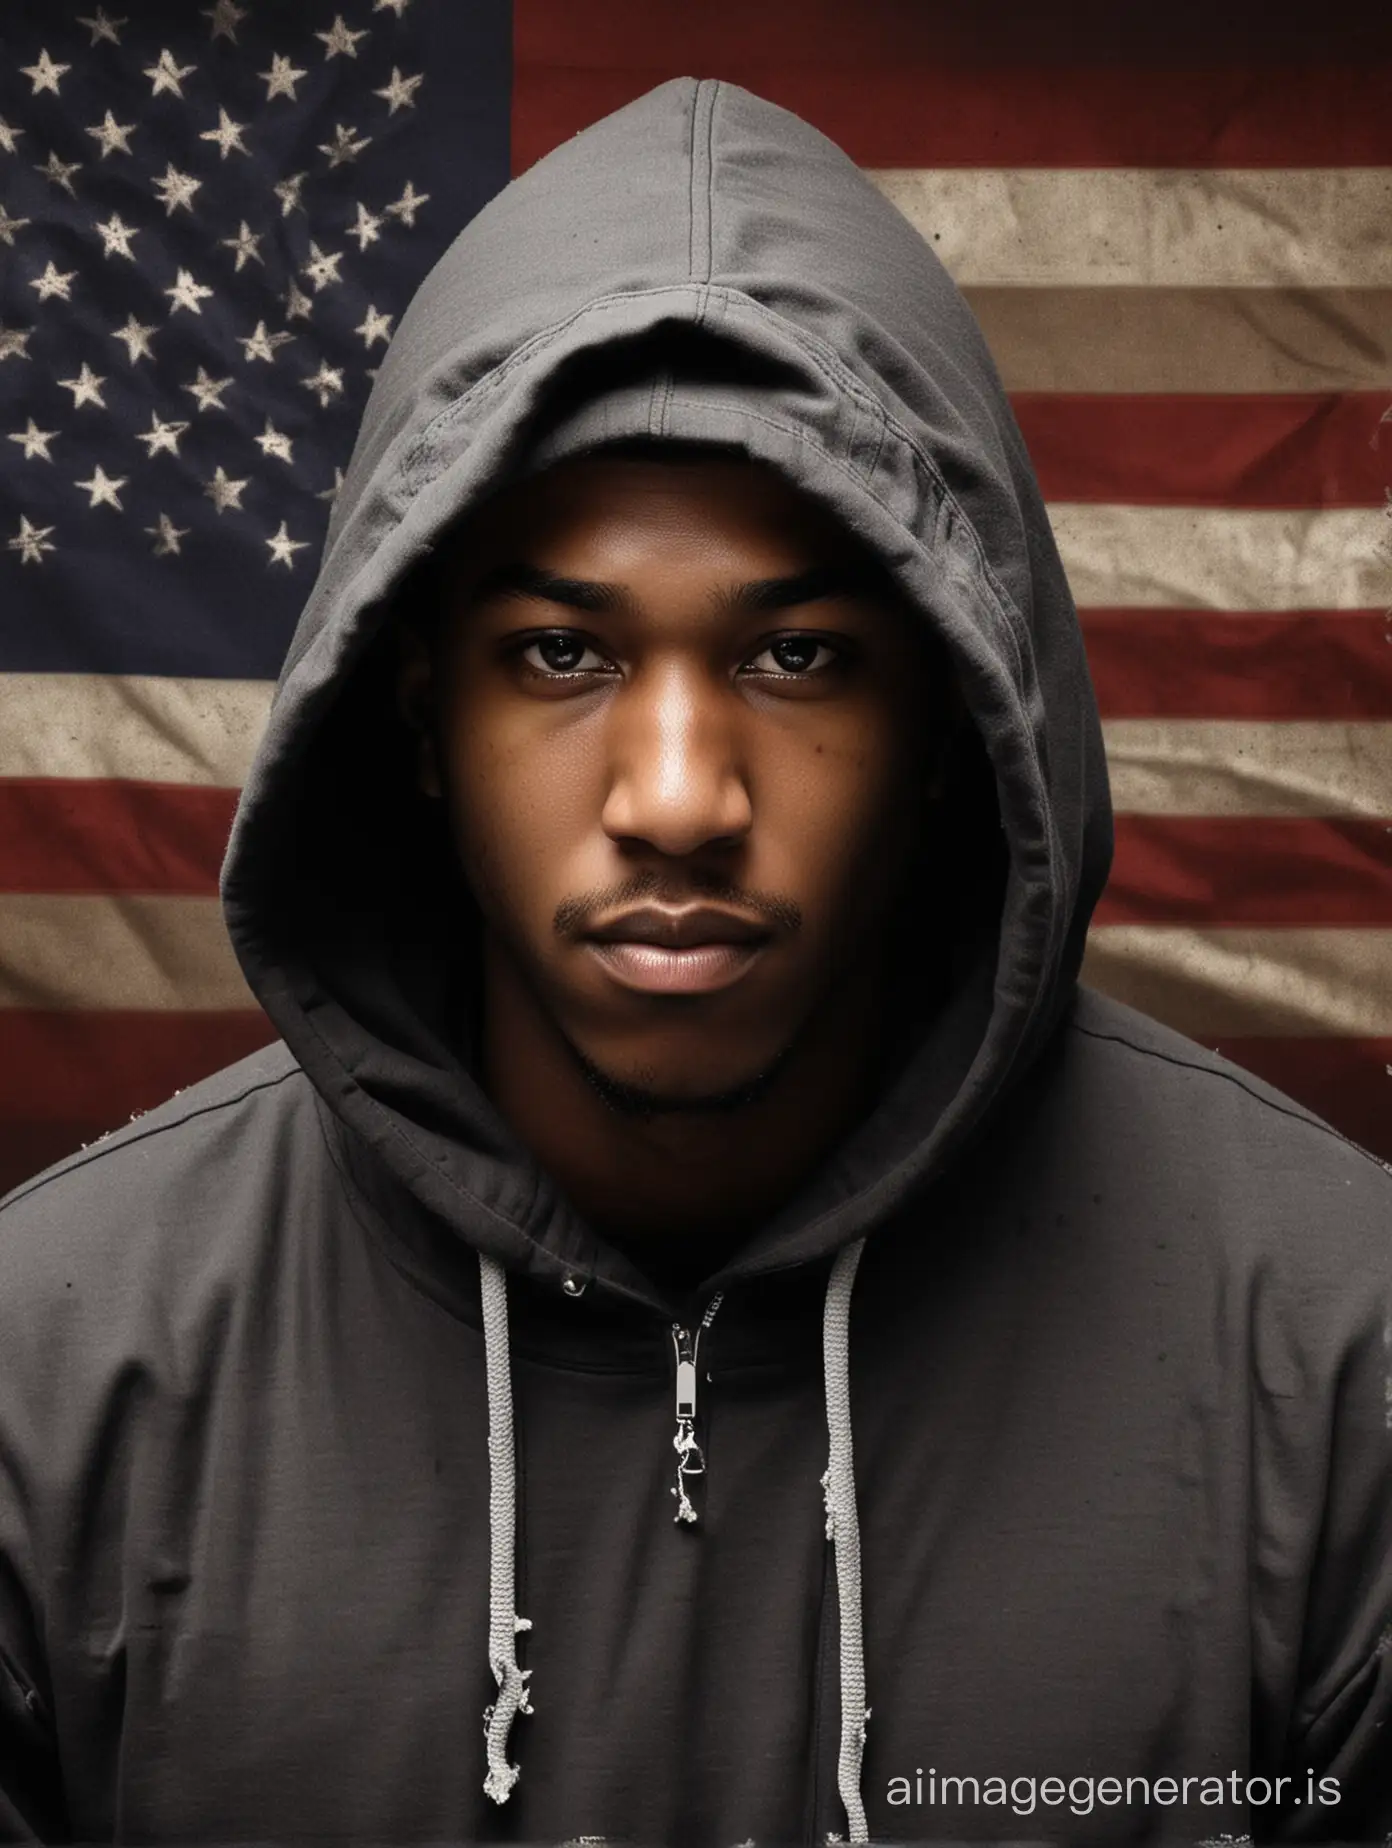 Grieving-Trayvon-Martin-in-Hoodie-Against-Distressed-American-Flag